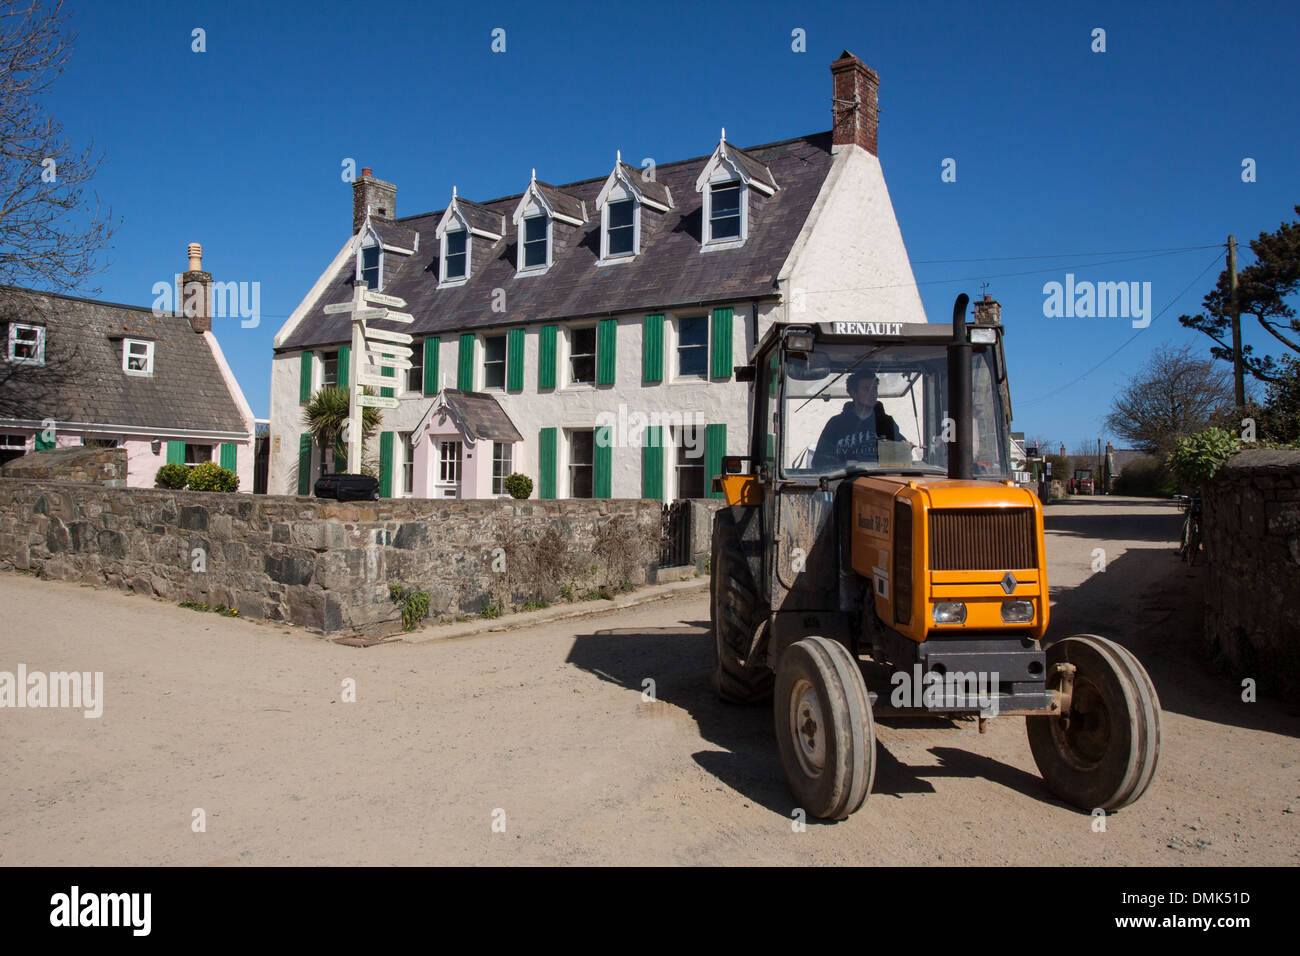 TRACTOR IN THE TOWN CENTRE OF SARK, ISLAND OF SARK, CHANNEL ISLANDS Stock Photo